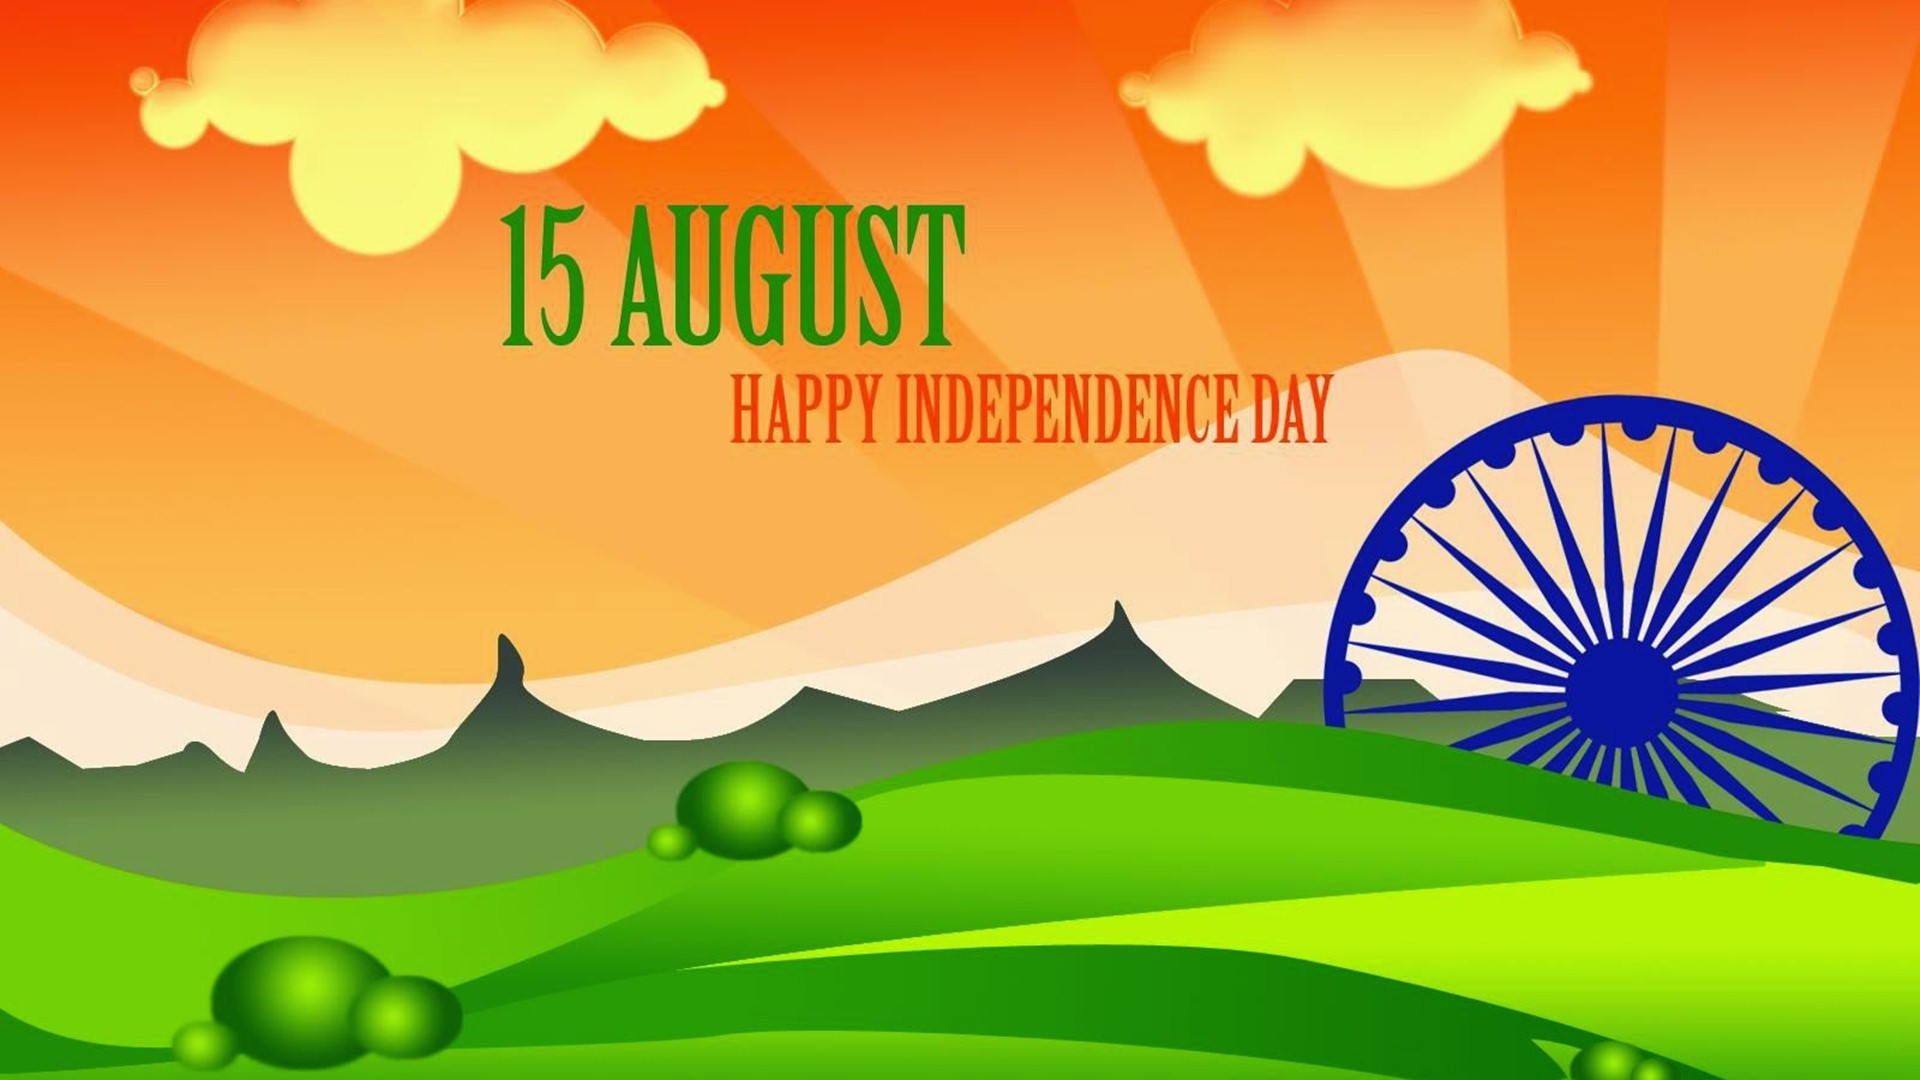 Indian Independence Day Quotes Wallpaper - 15 August Happy Independence Day - HD Wallpaper 